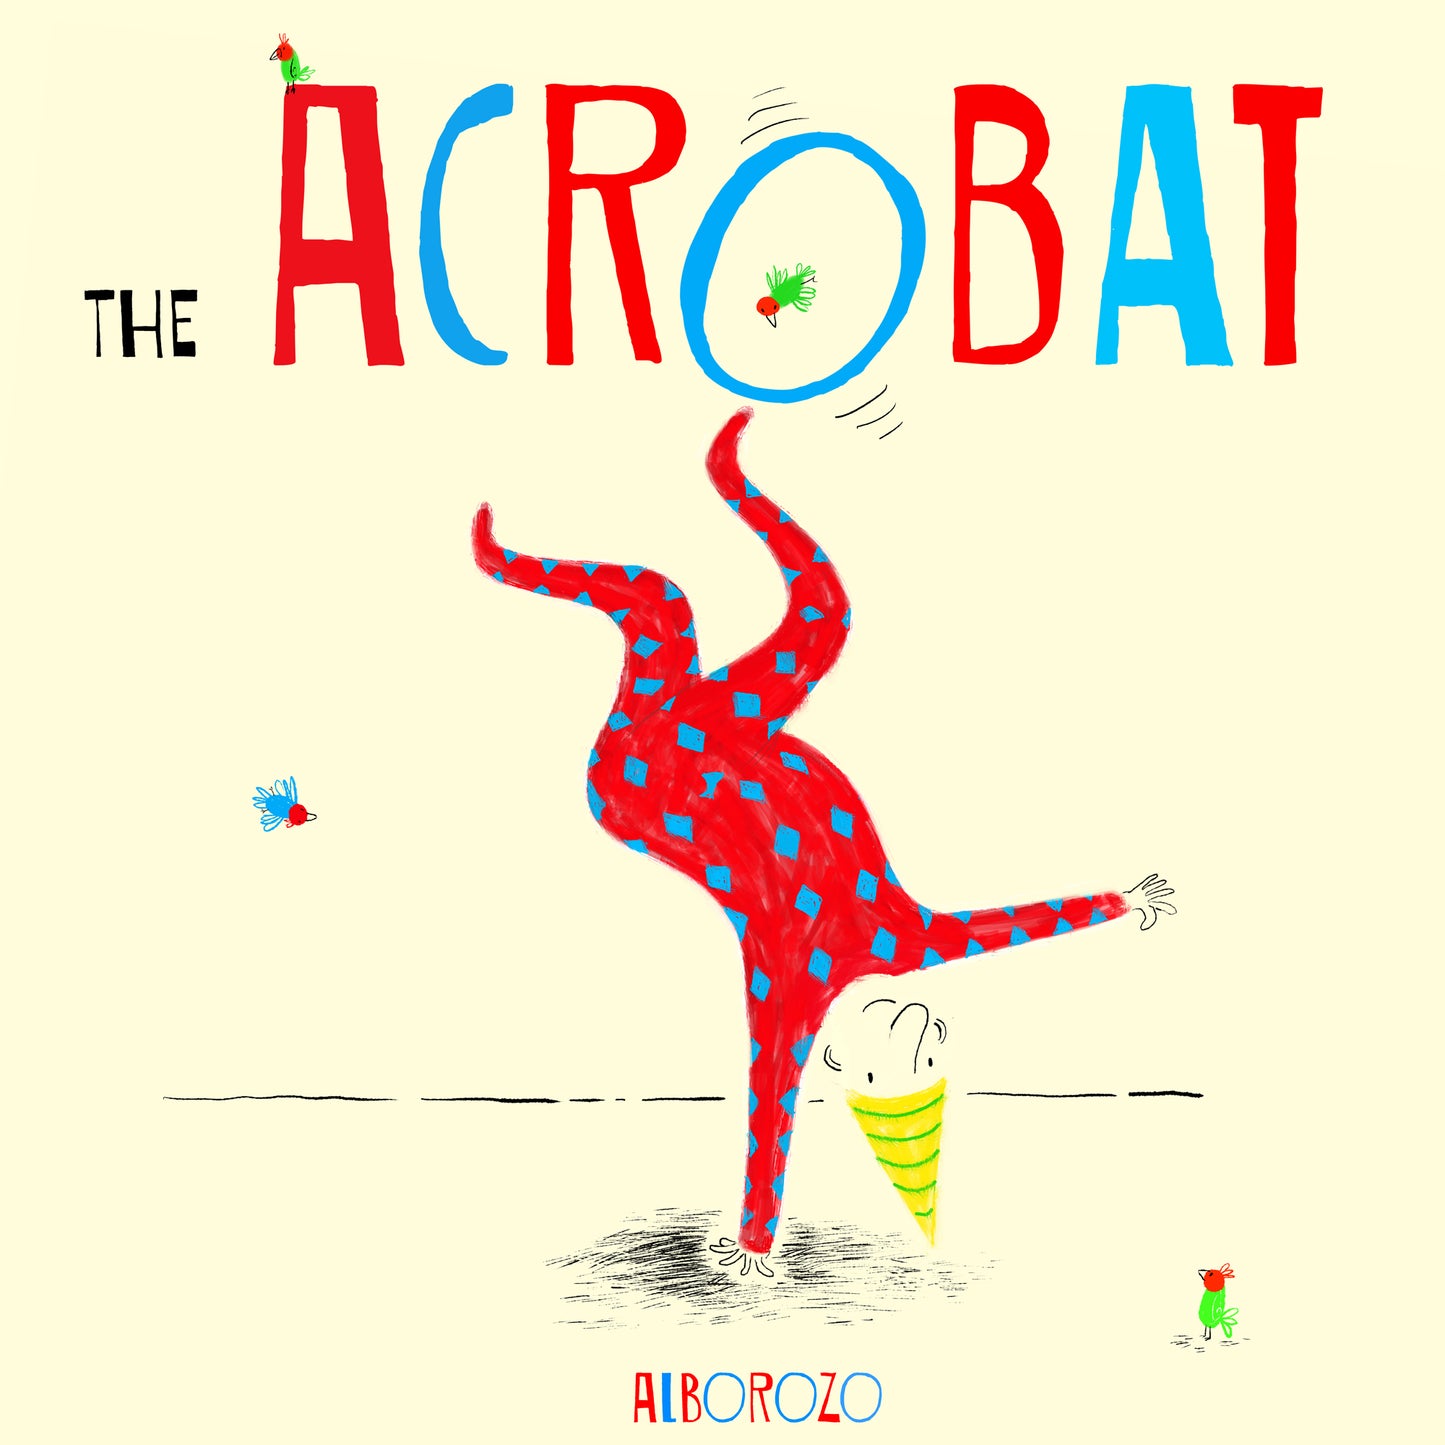 The Acrobat (Hardcover Edition)